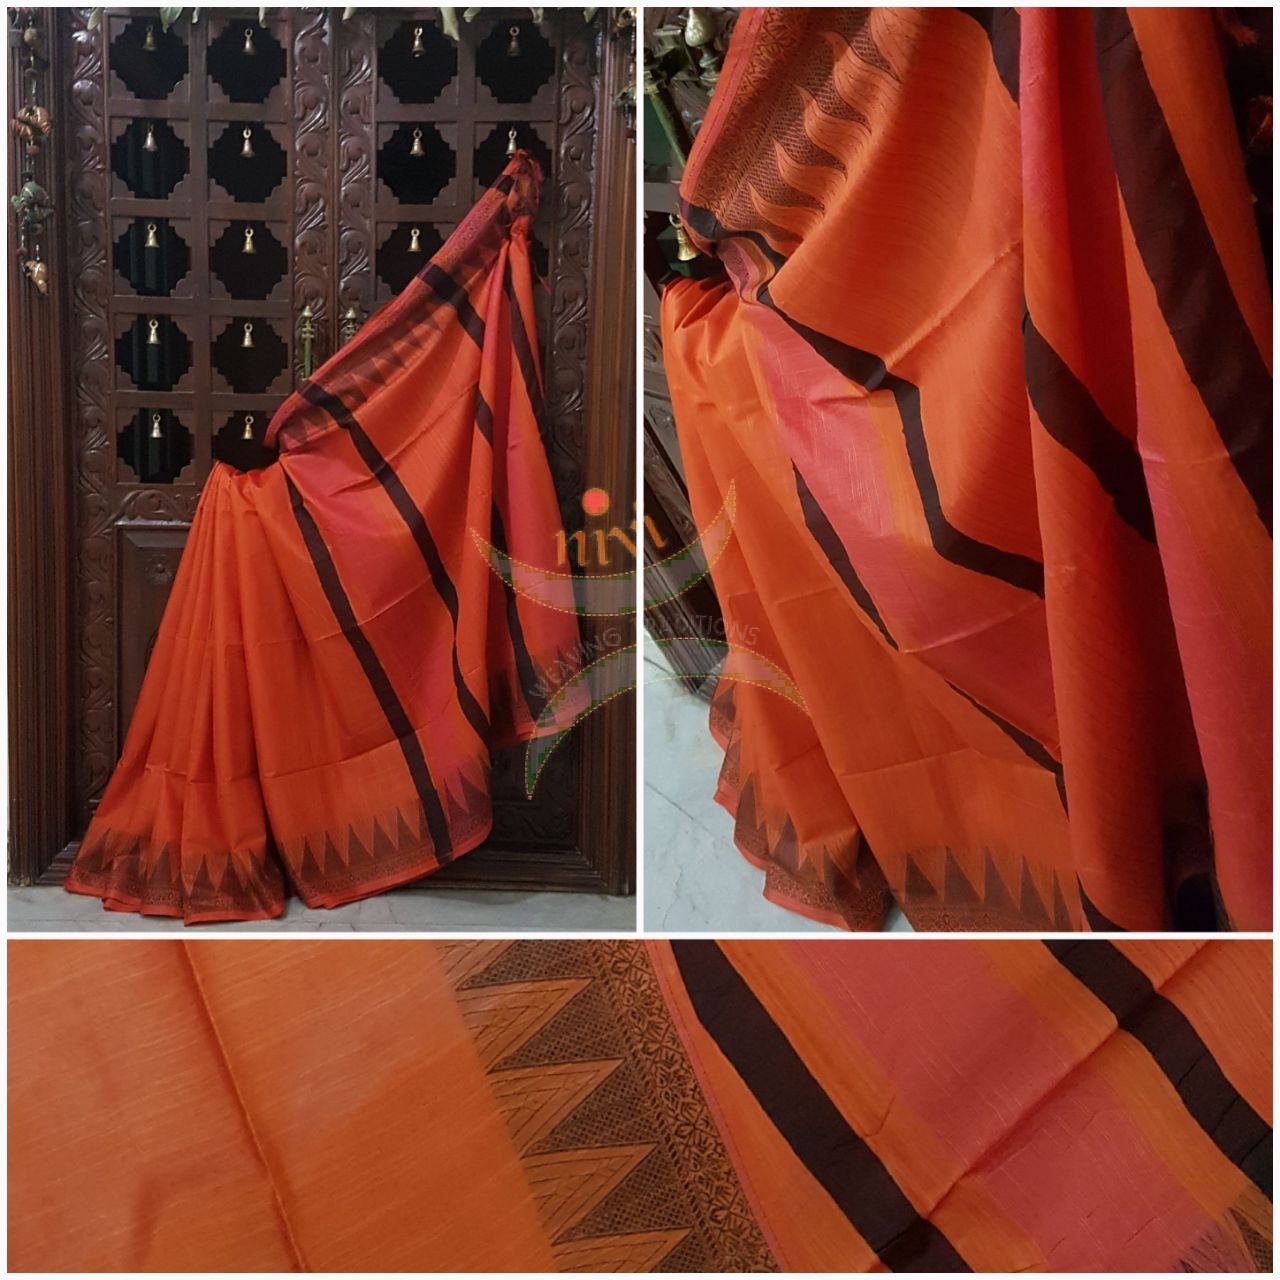 Orange with Black Bengal handloom cotton saree with traditional woven border and striped pallu.